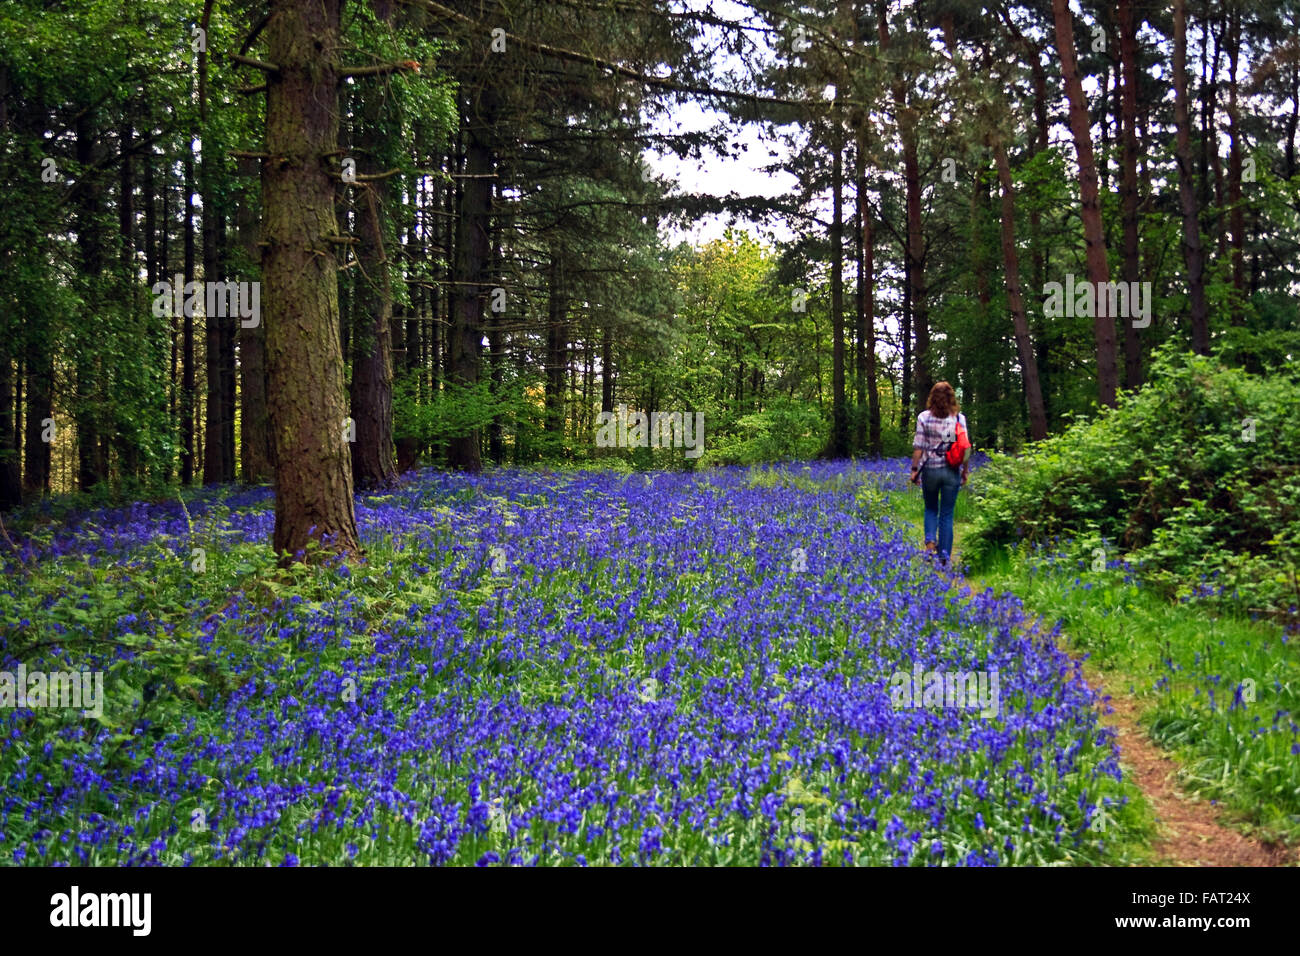 Female walker in bluebell woods carrying a red rucksack. Stock Photo